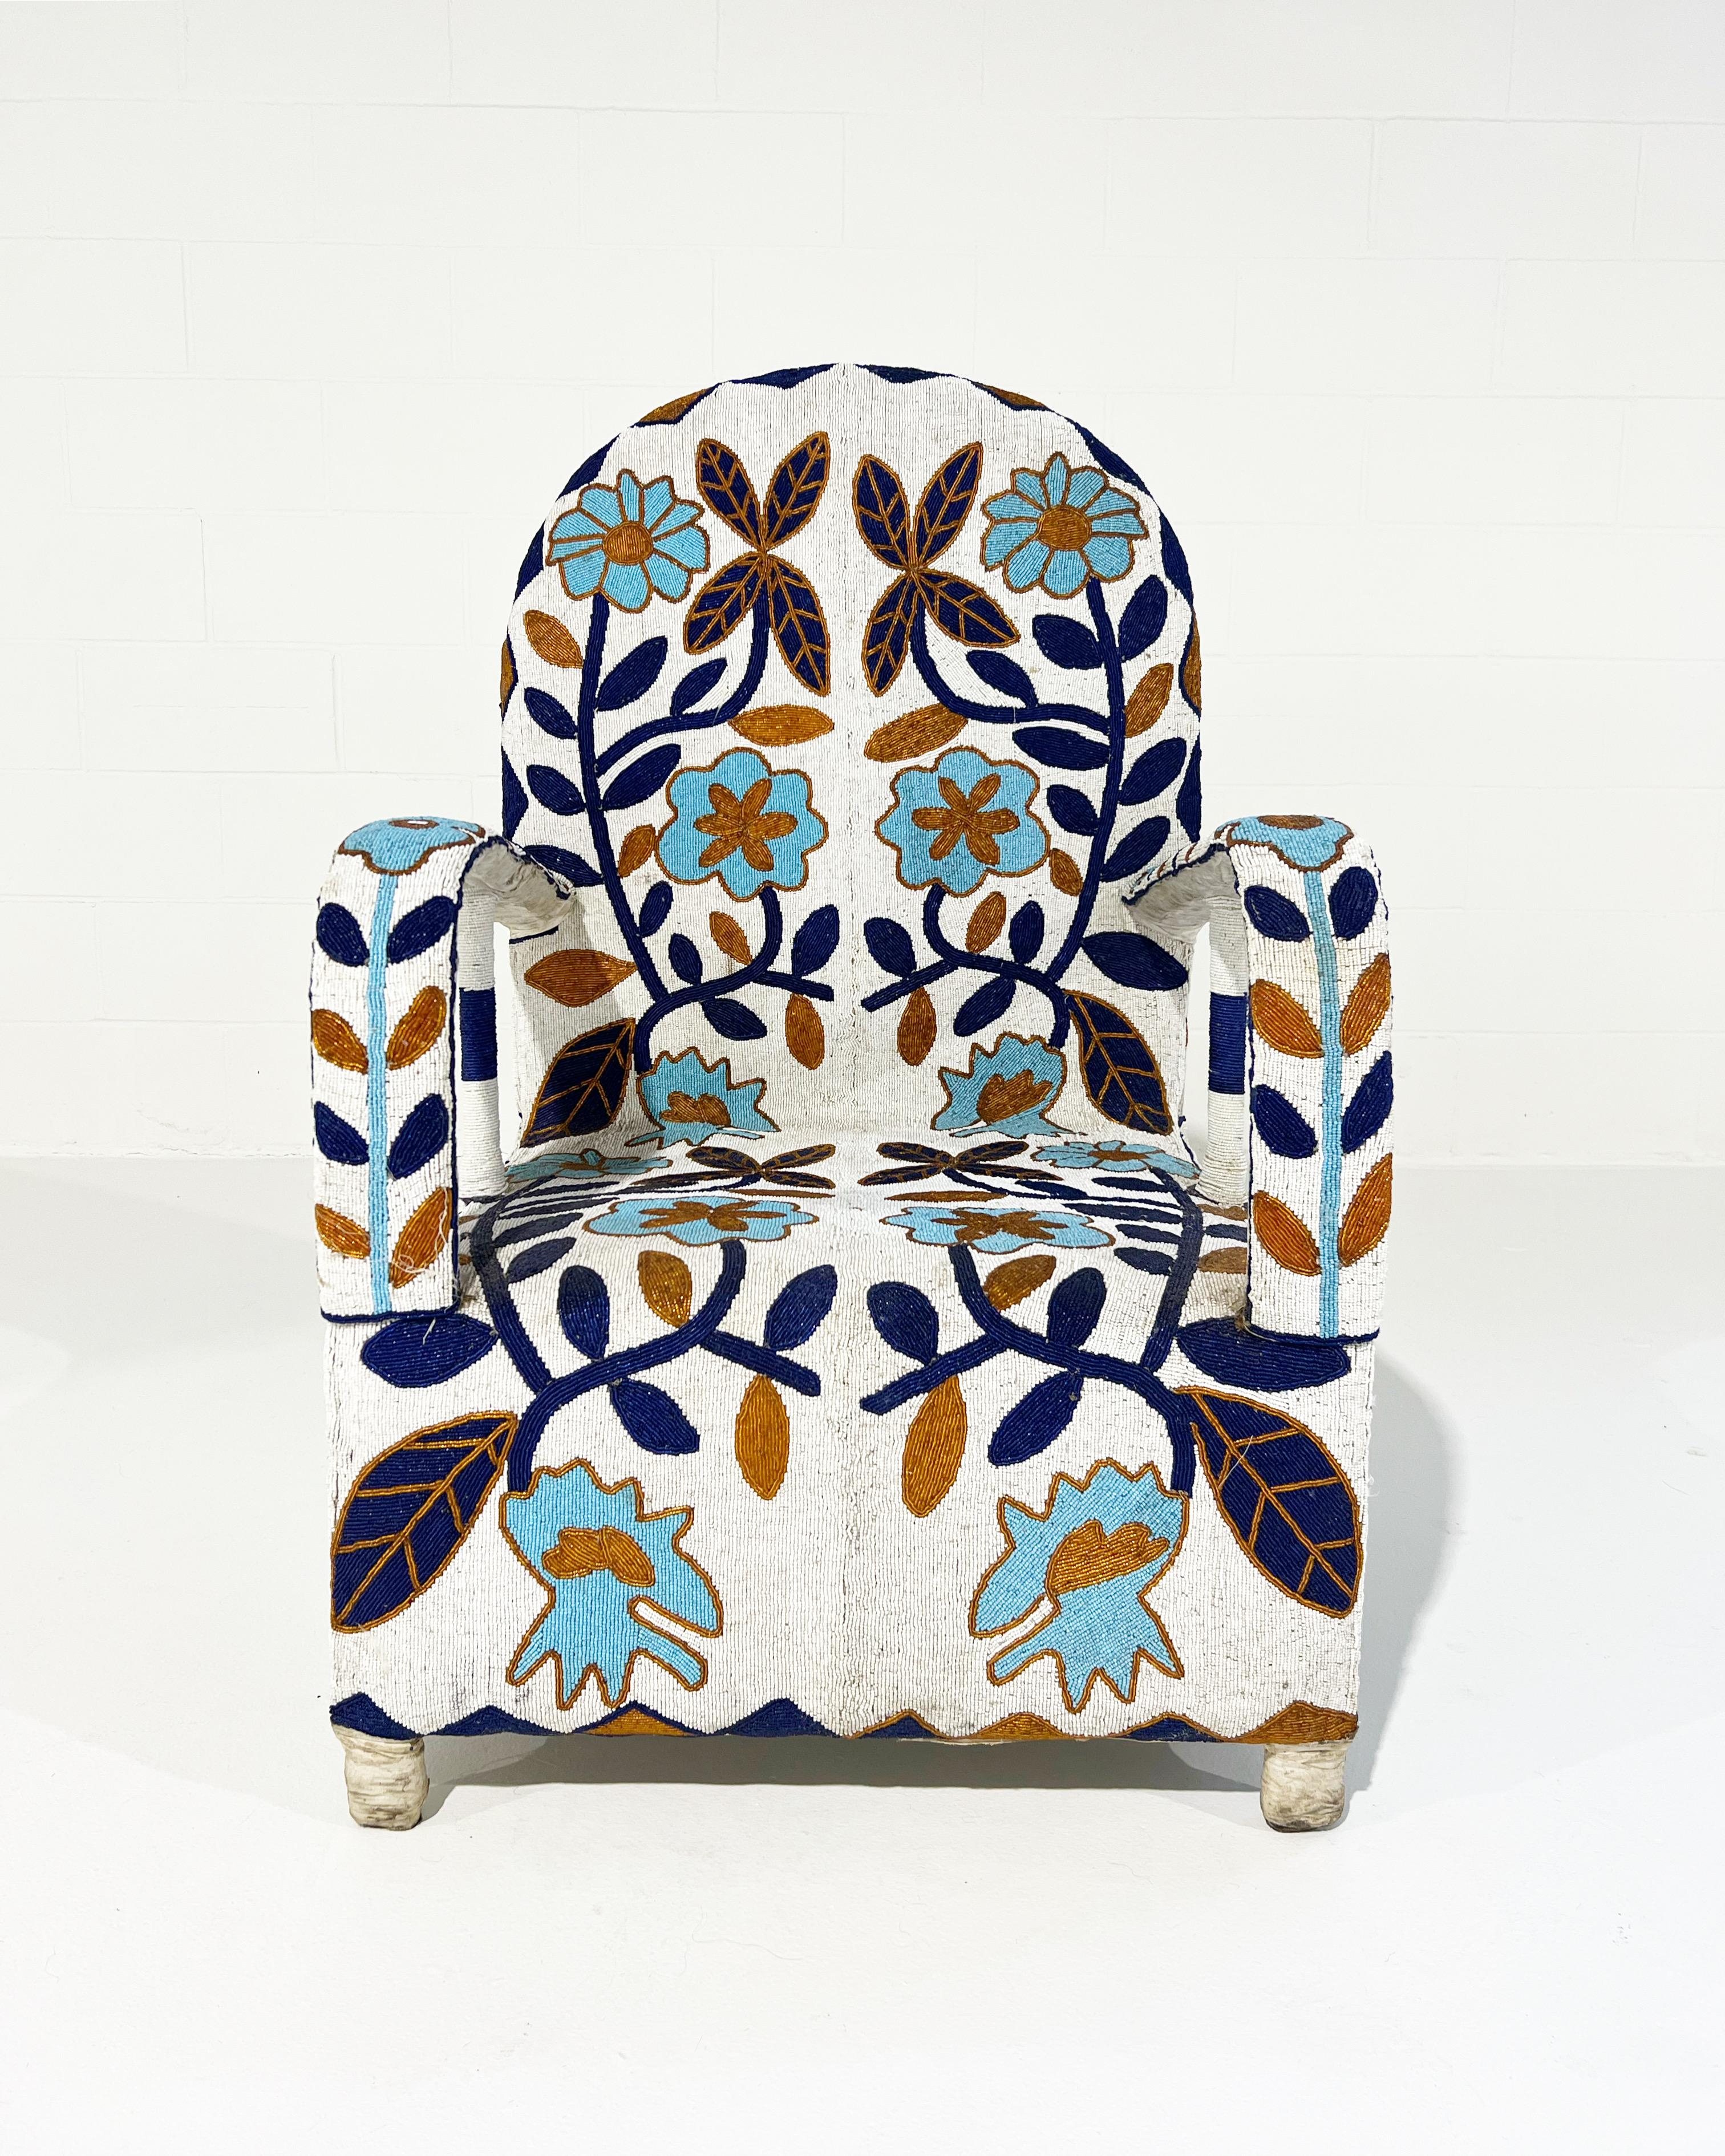 Description
Originally handcrafted for the Nigerian Yoruba Tribe kings and queens, each chair takes approximately 3 months to make. Thousands of tiny glass beads are intricately applied to canvas fabric in beautiful shapes and designs. The fabric